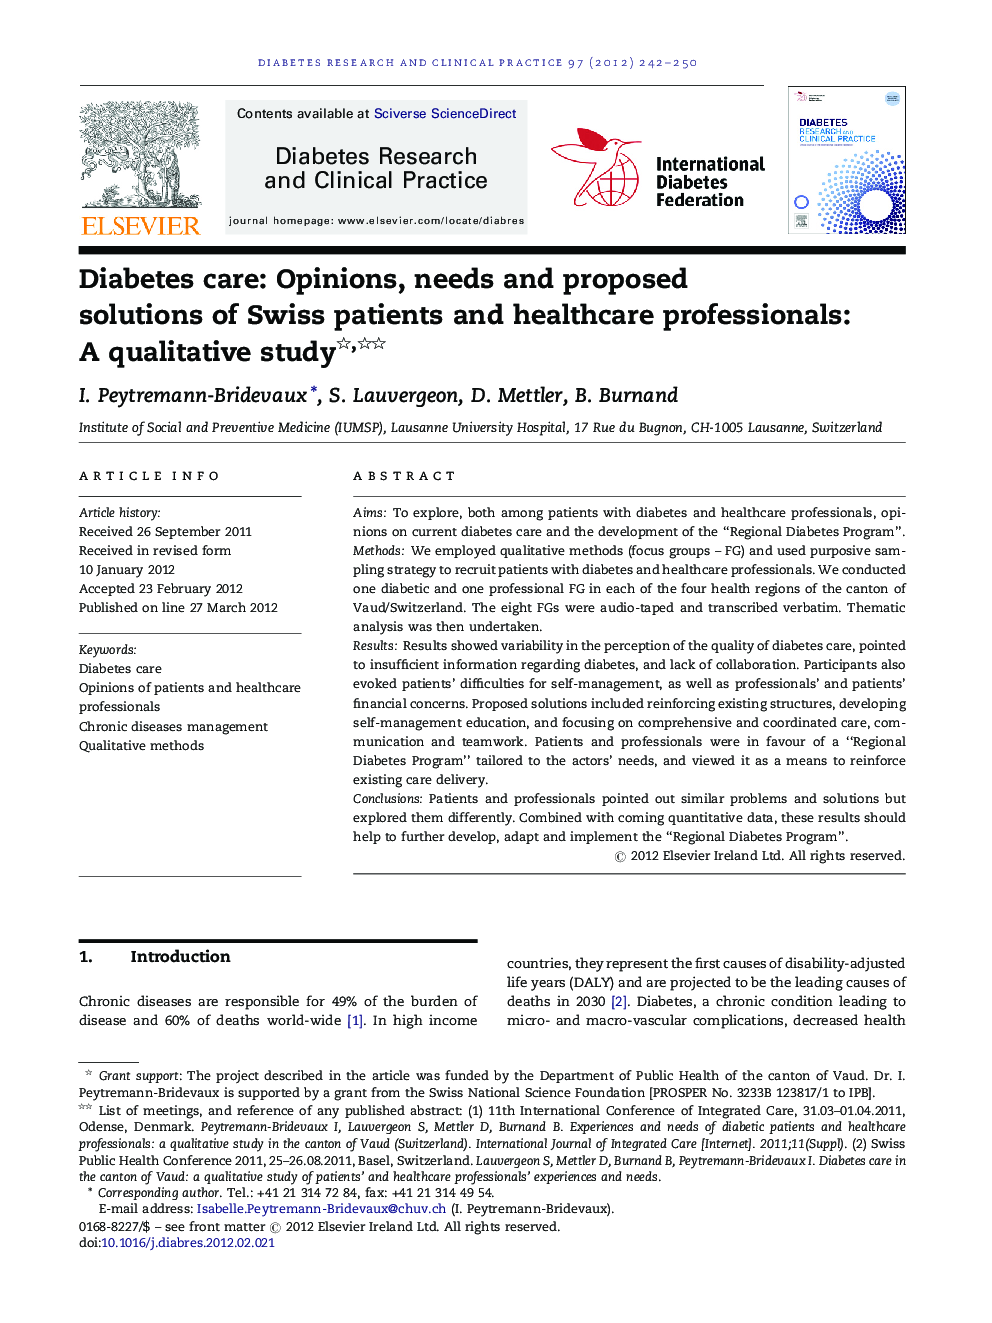 Diabetes care: Opinions, needs and proposed solutions of Swiss patients and healthcare professionals: A qualitative study